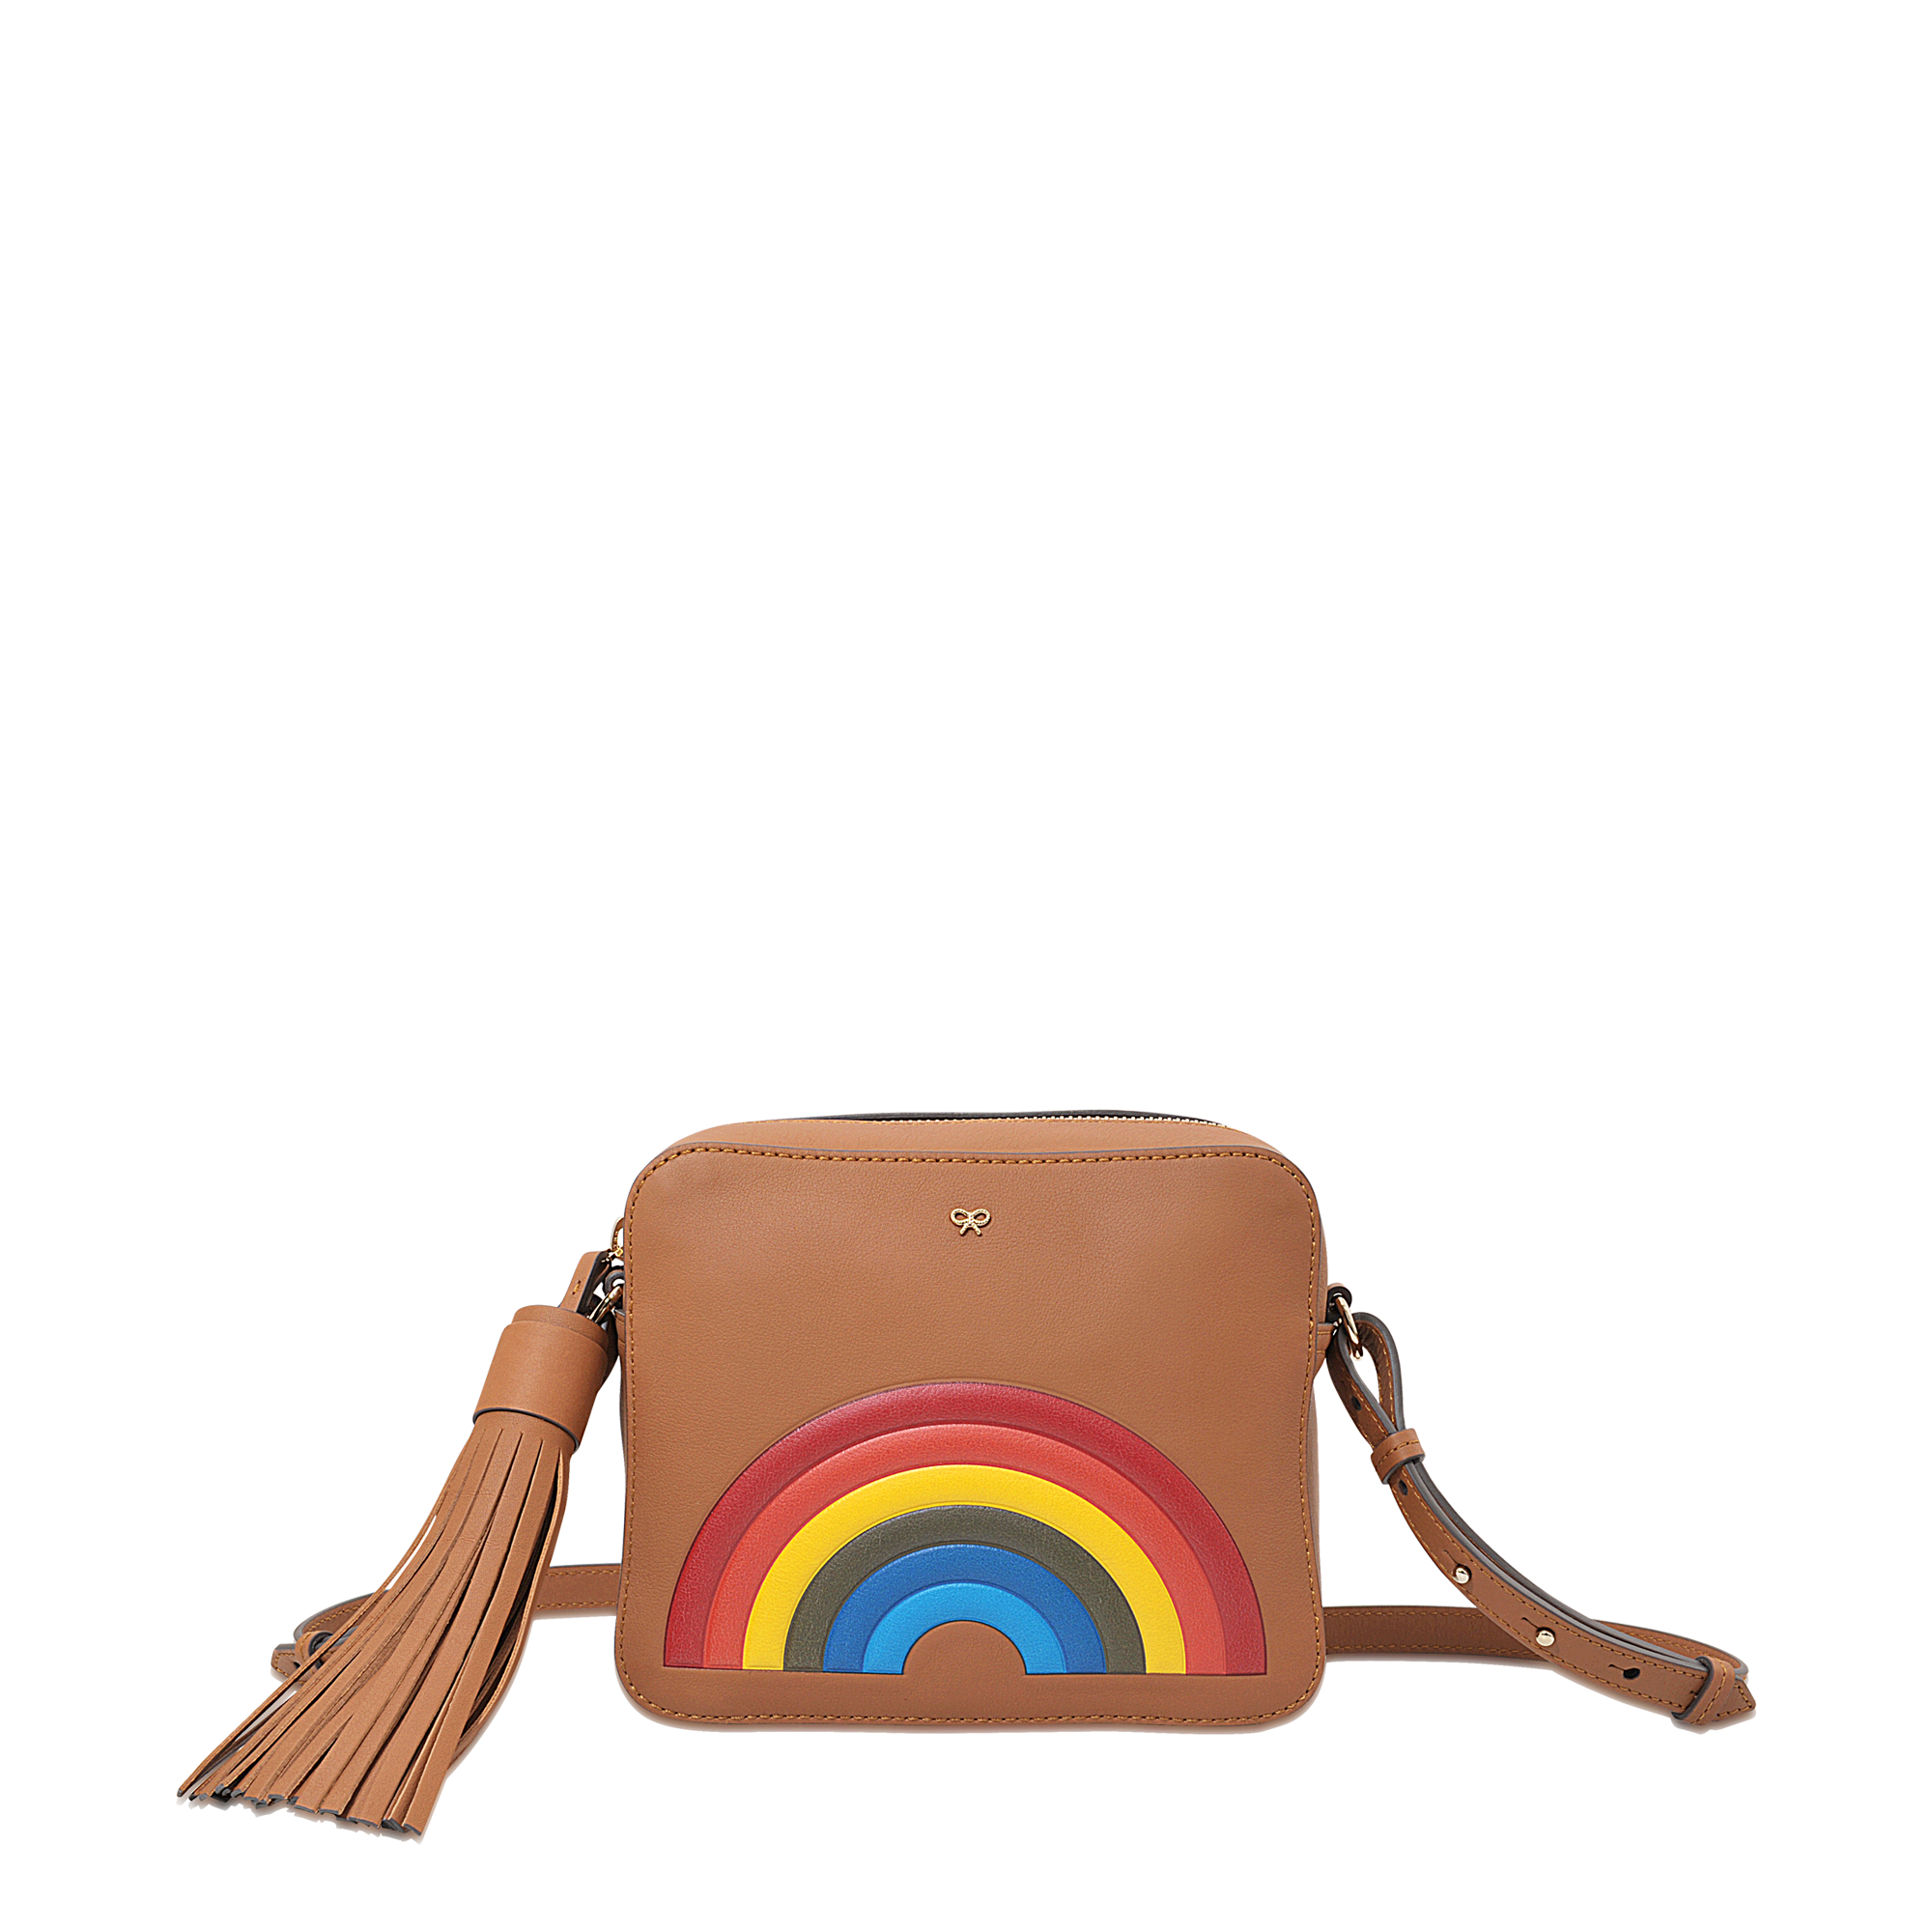 Anya Hindmarch Leather Rainbow Cross Body Bag in Brown - Lyst